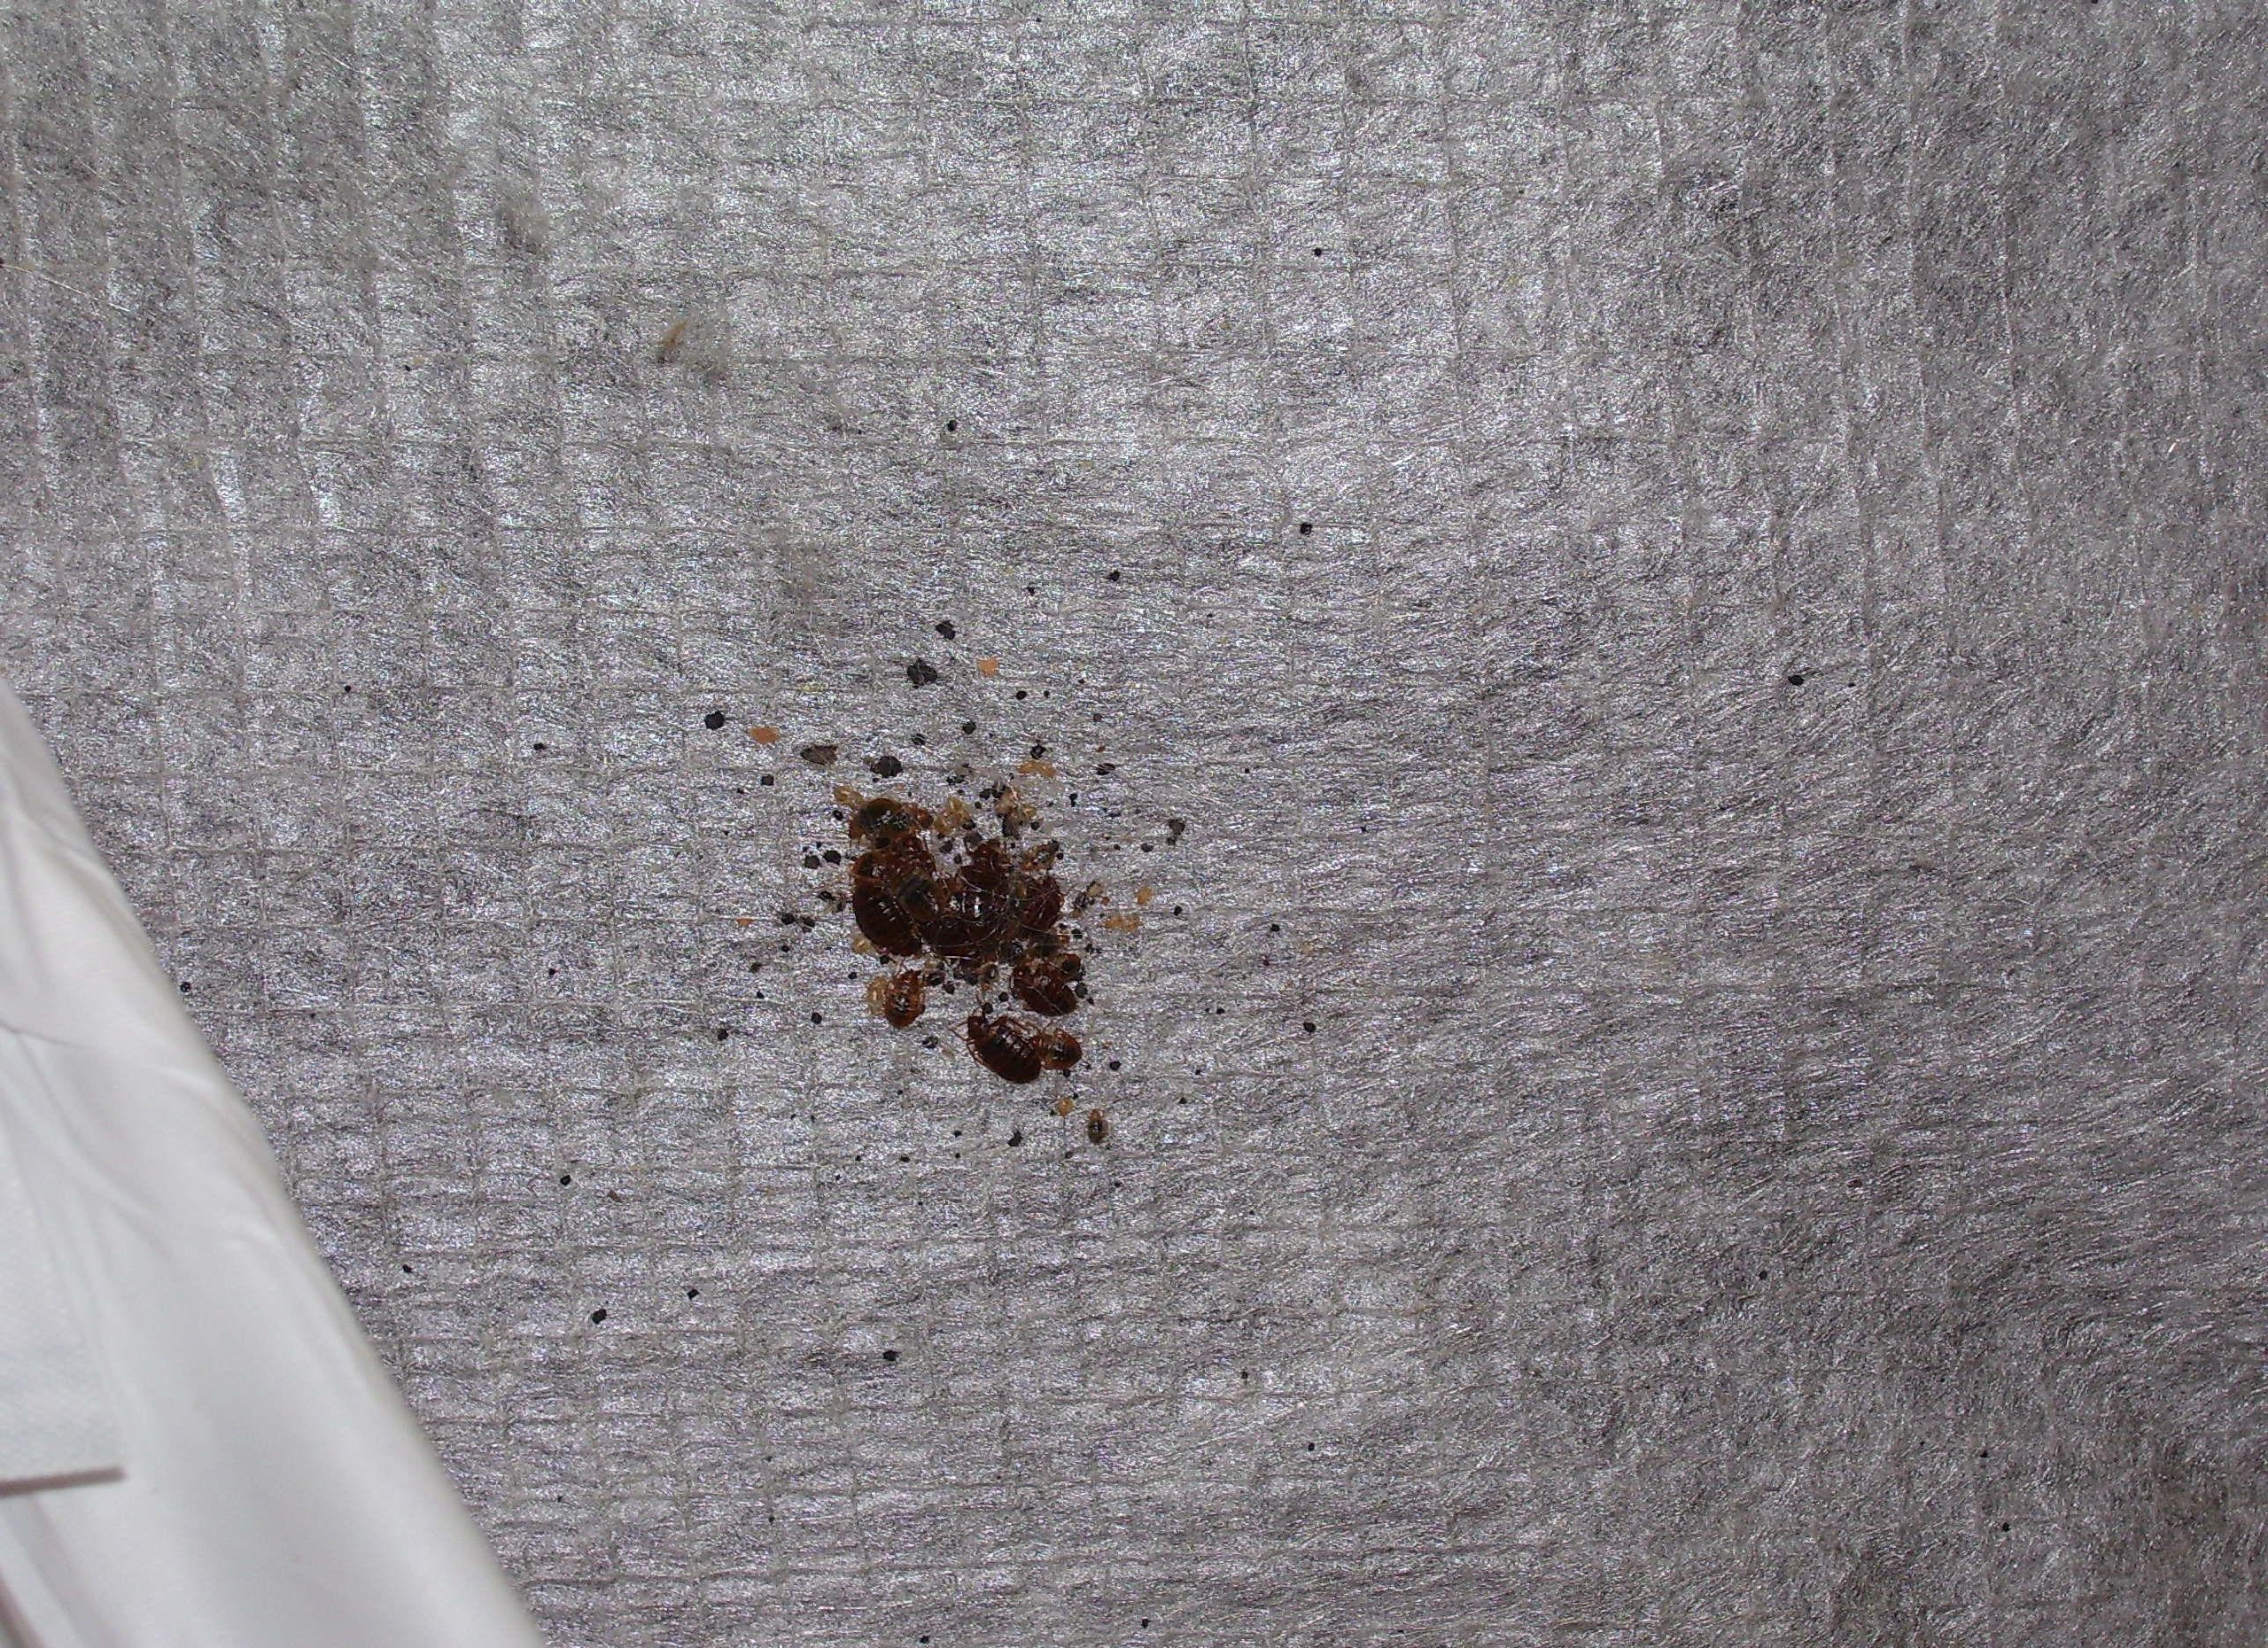 ... bed bug calls a year are now reporting 1 to 2 each week. â€¦ Document